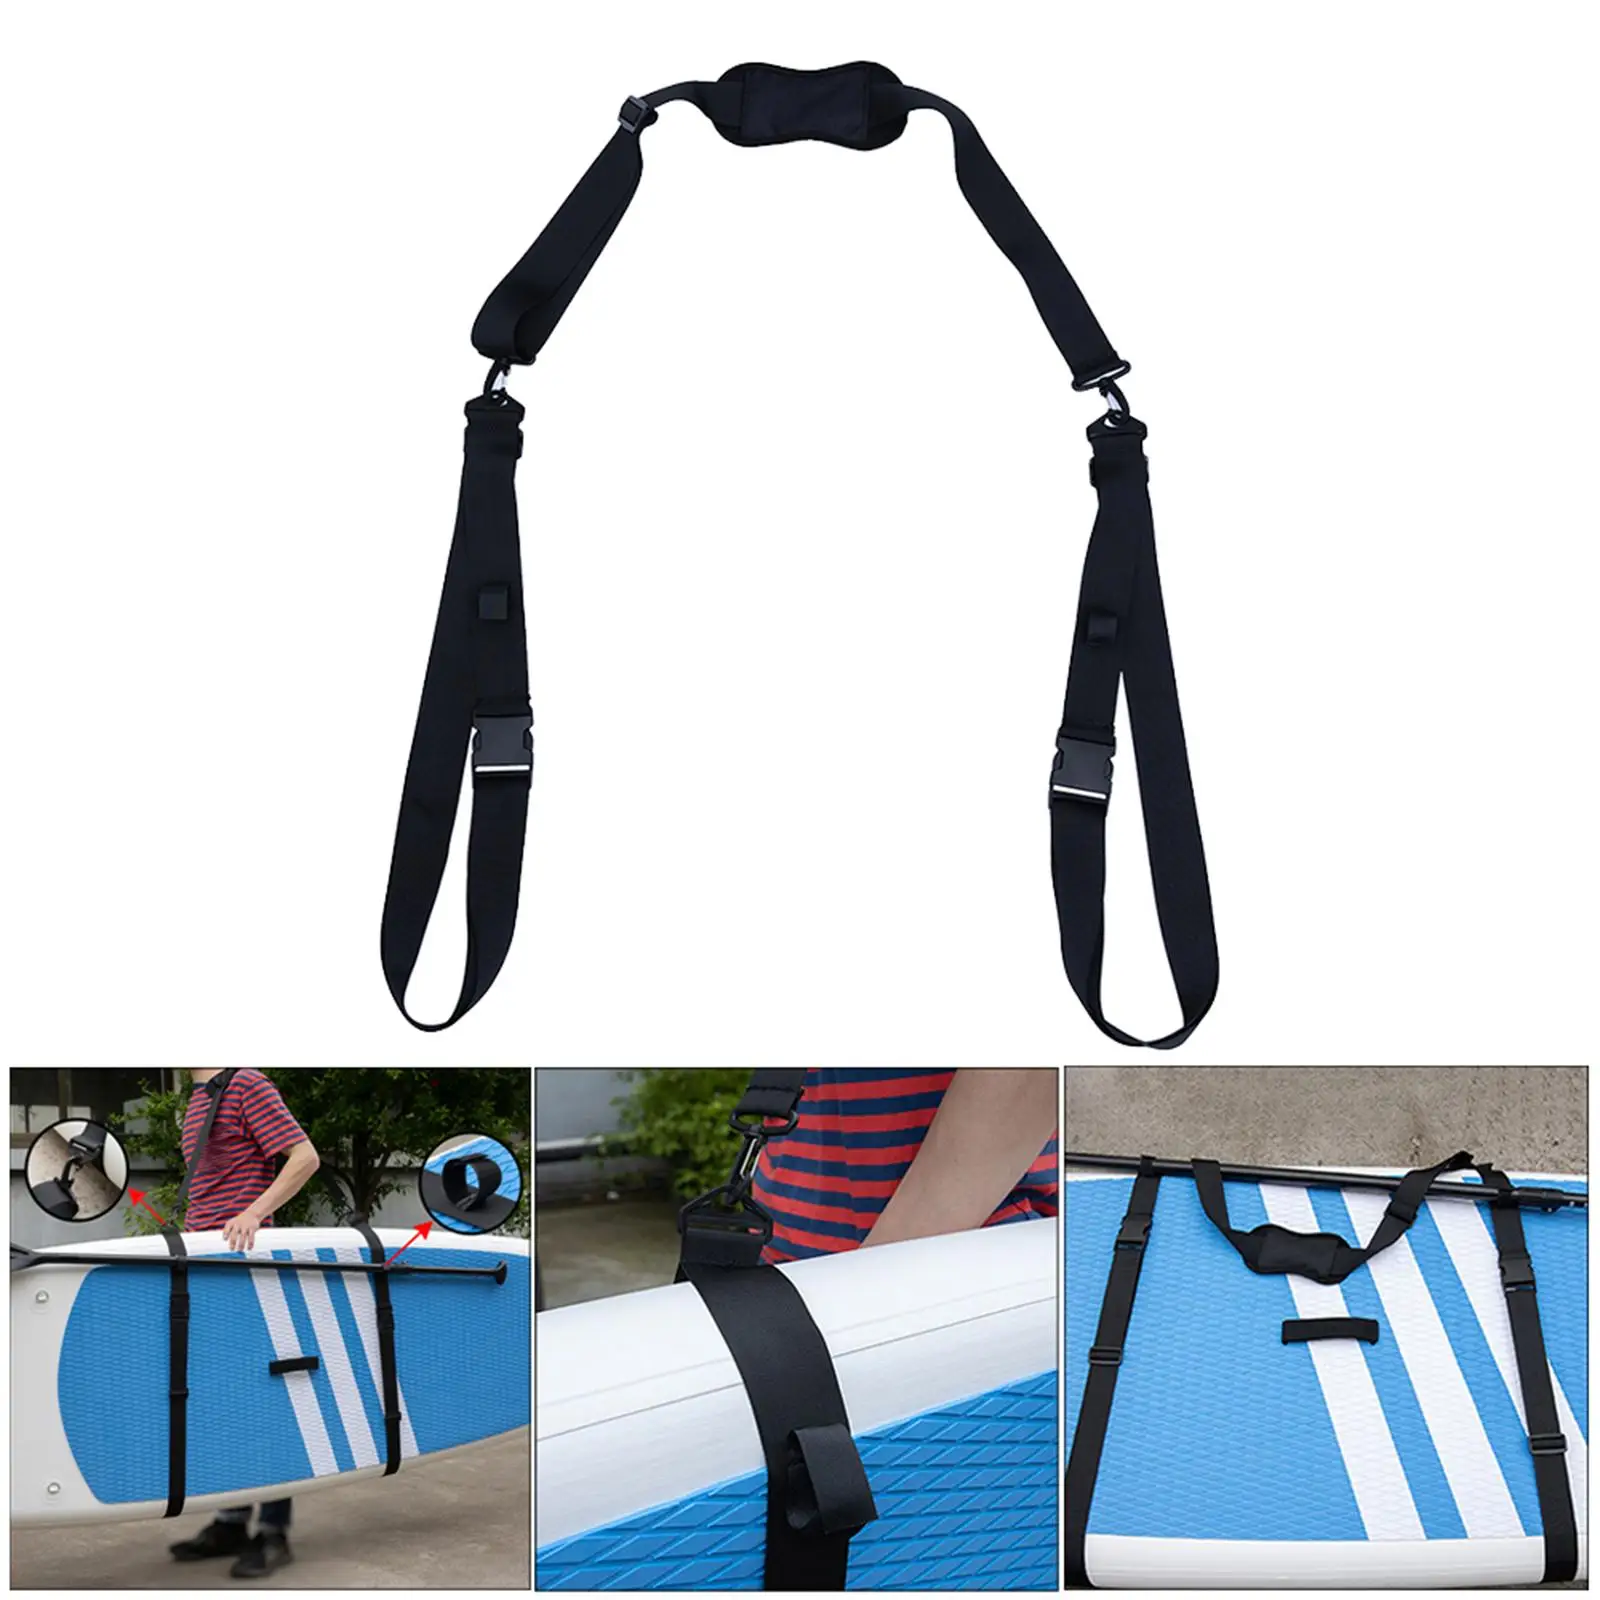 Surfboard Shoulder Carrier Strap Kayak Storage  Adjustable Length with Metal Accessories for  Board Carrying